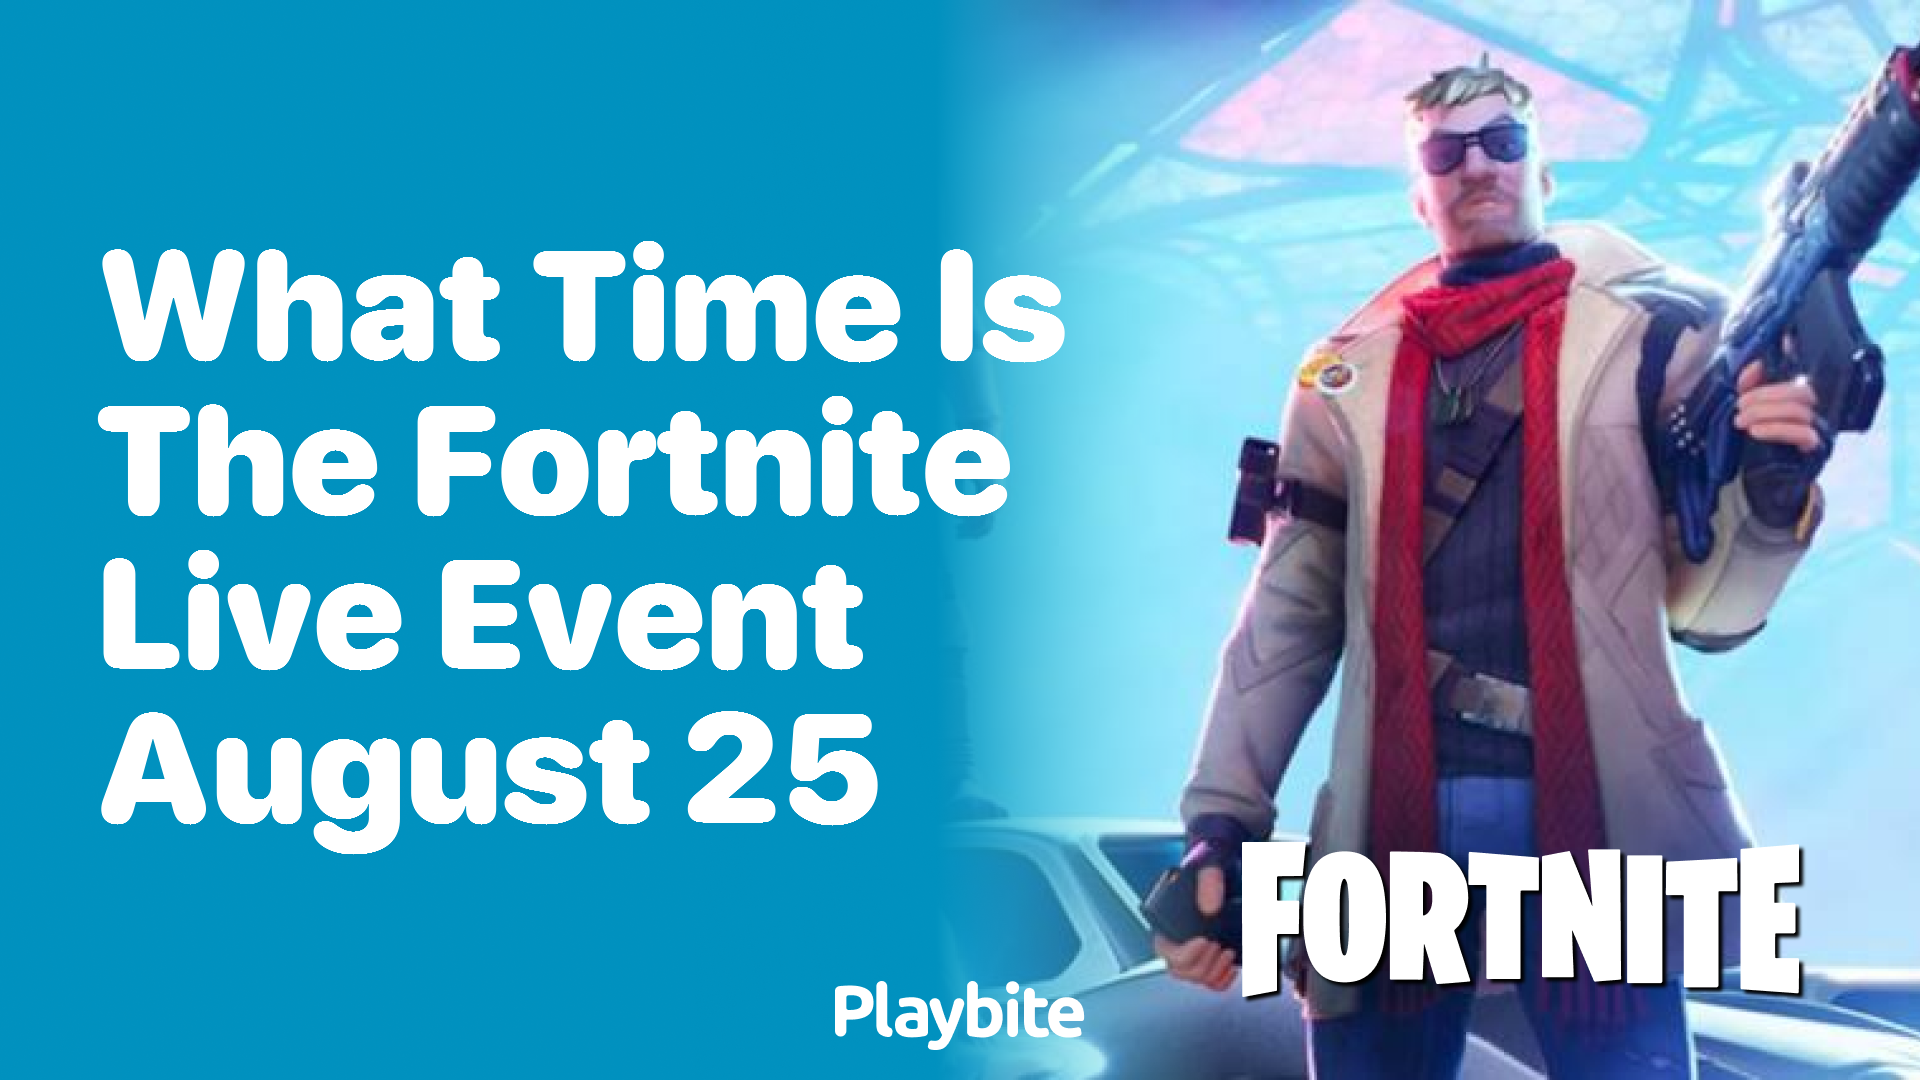 What Time Is the Fortnite Live Event on August 25?